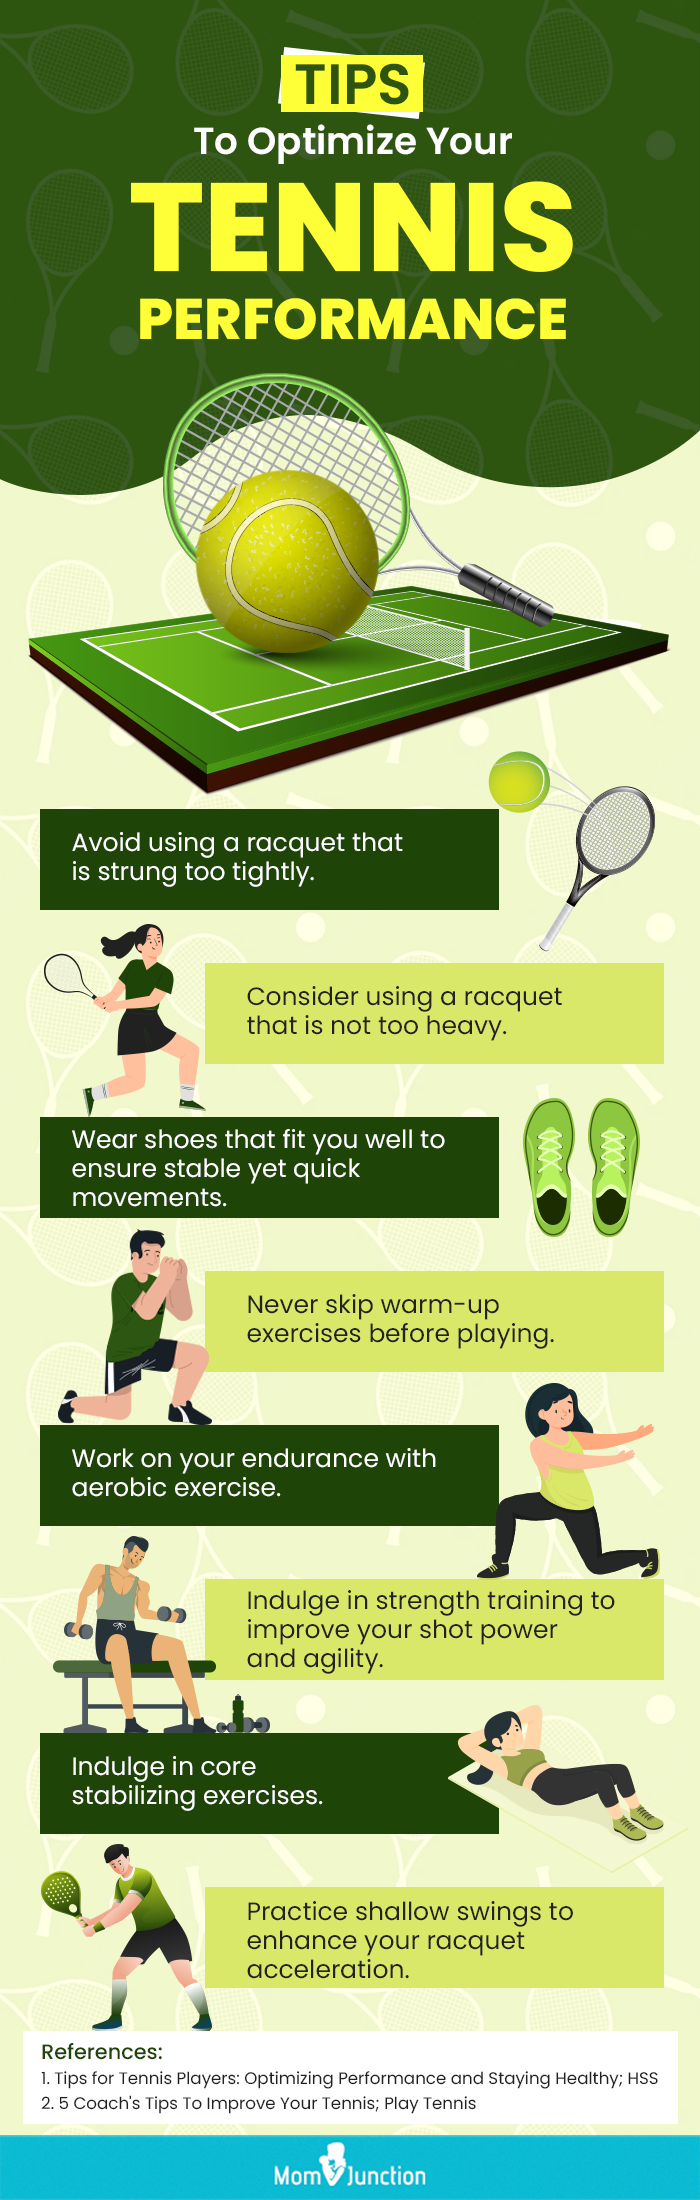 Tips To Optimize Your Tennis Performance (infographic)